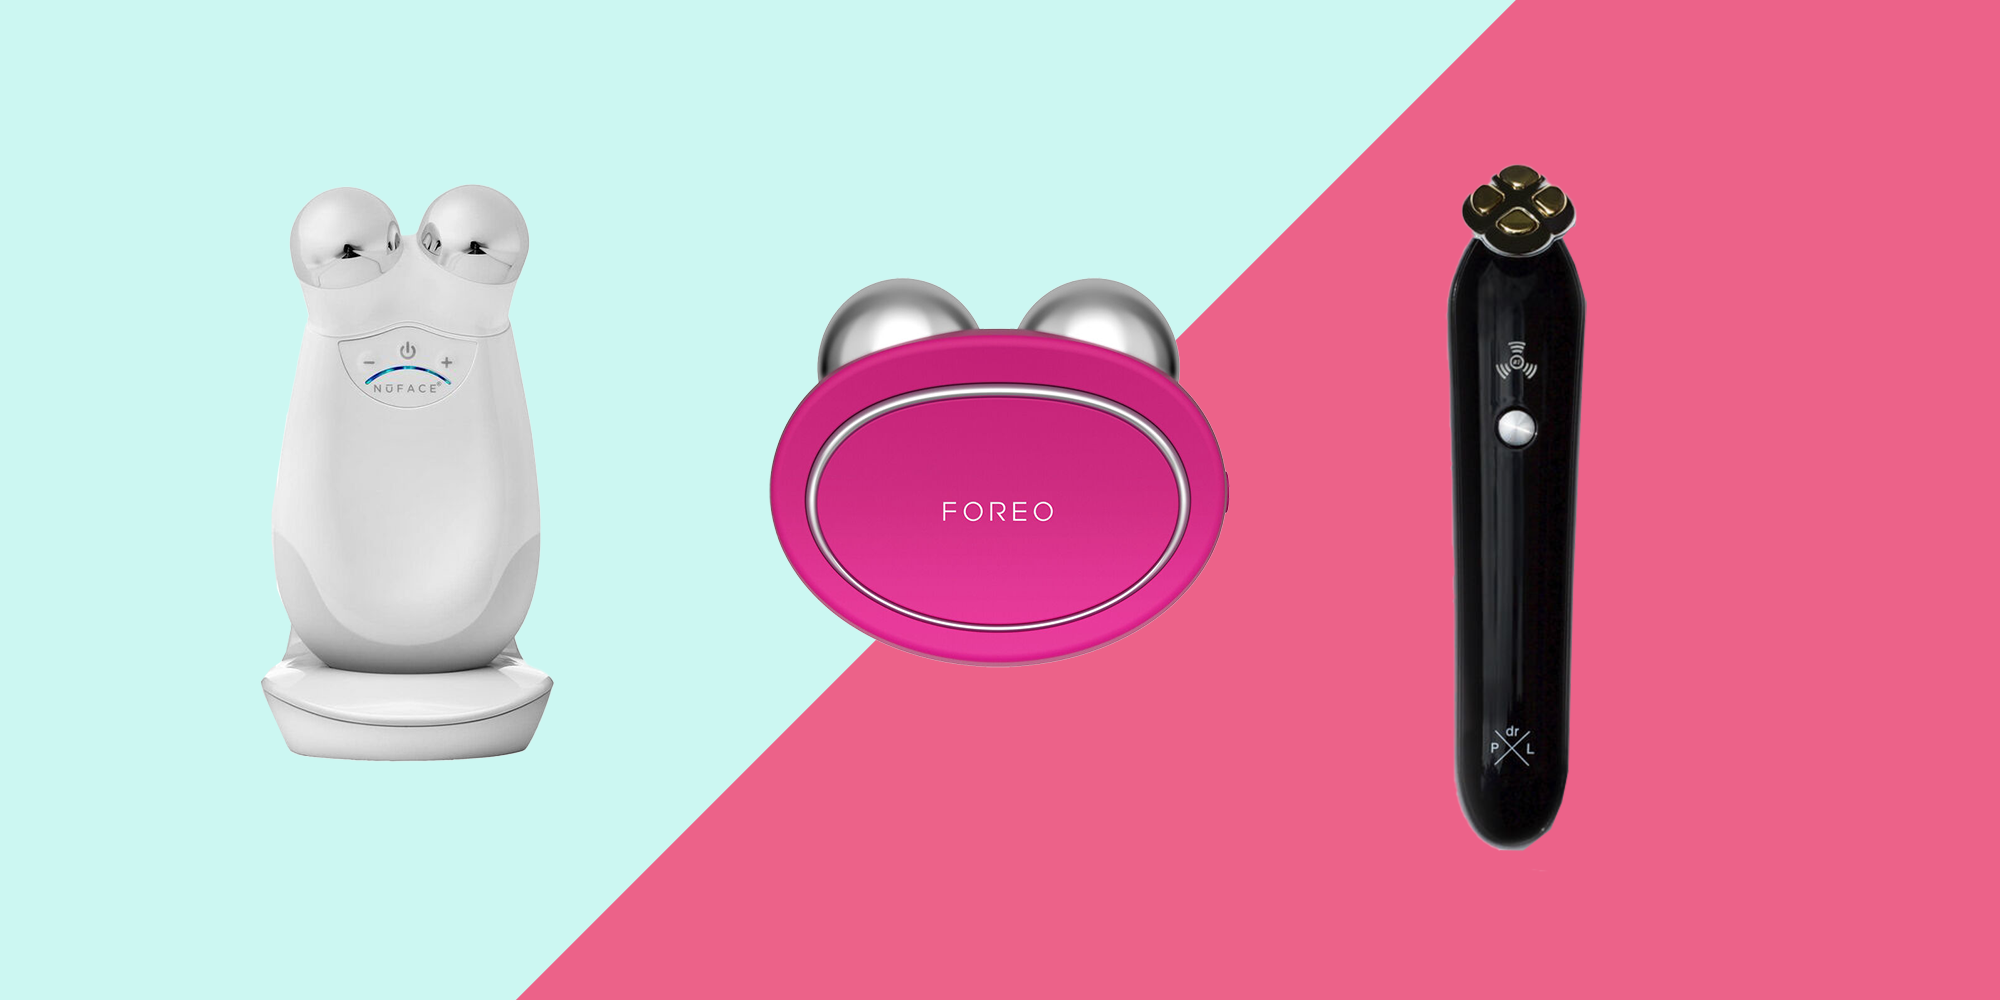 FOREO BEAR Review: The Best Non-Invasive Face-Lifting Device